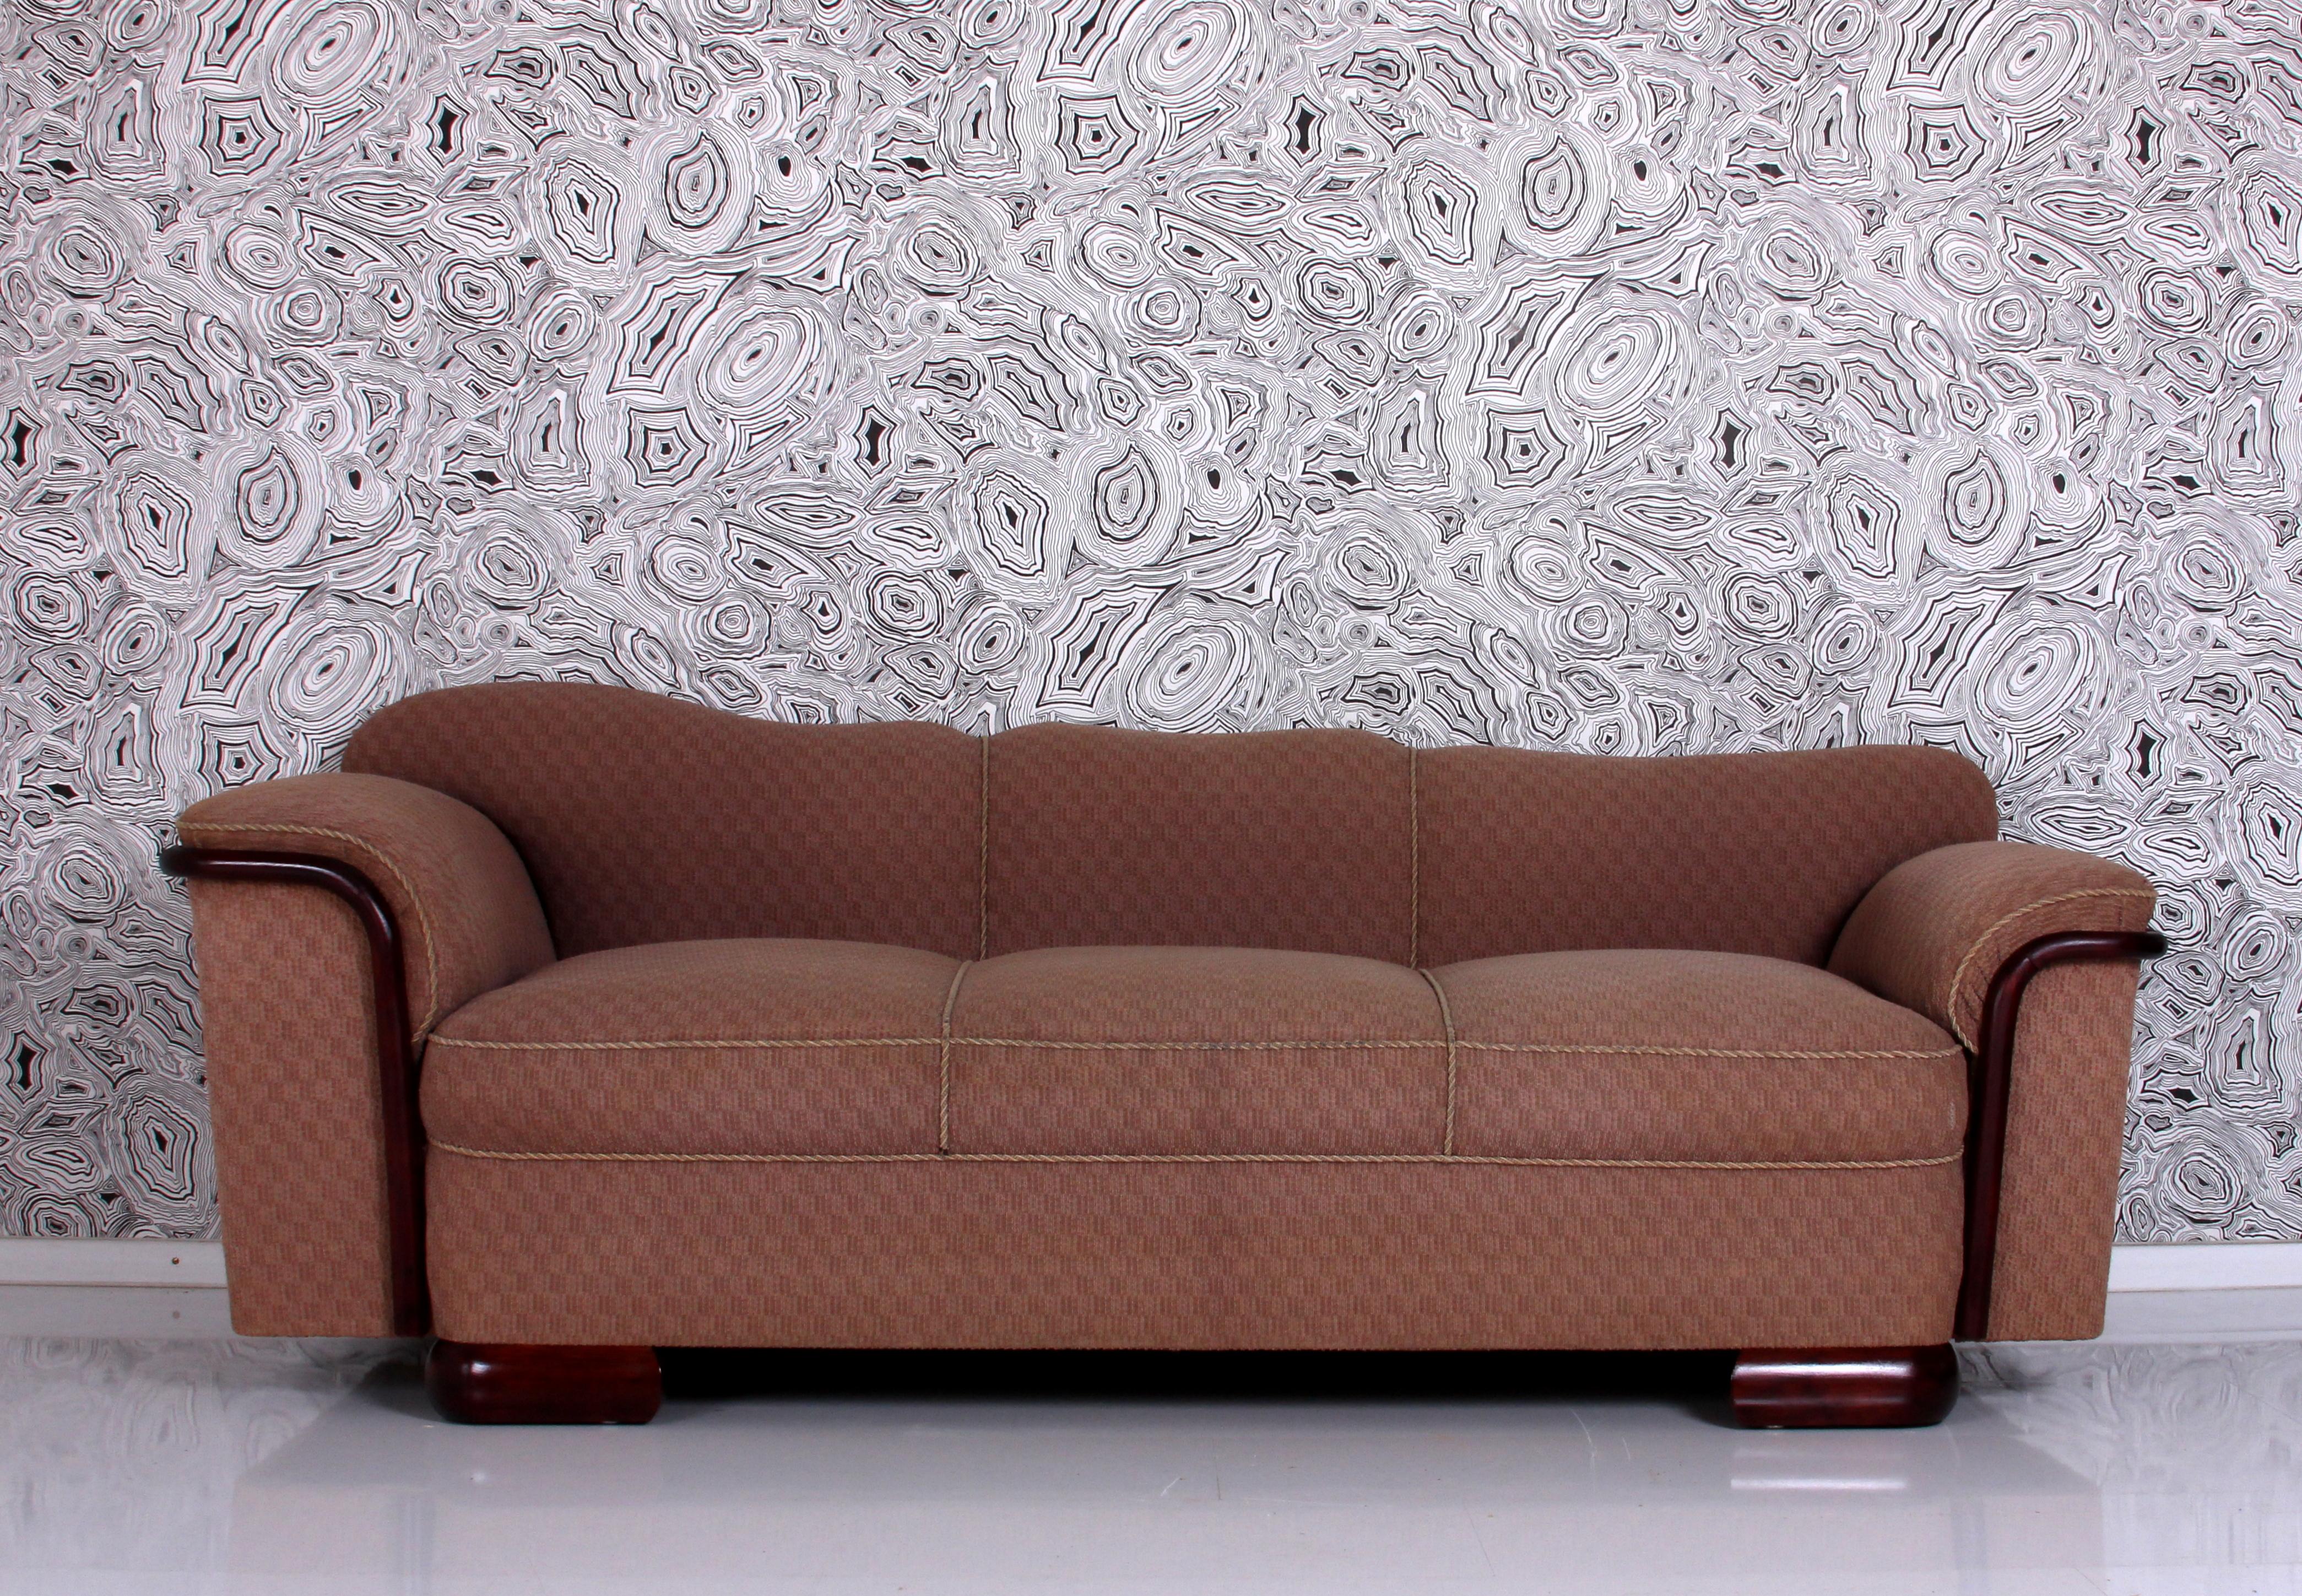 STRAIGHT classic art deco SOFA Dresden around 1930 or. fabric - wood refinished  For Sale 8